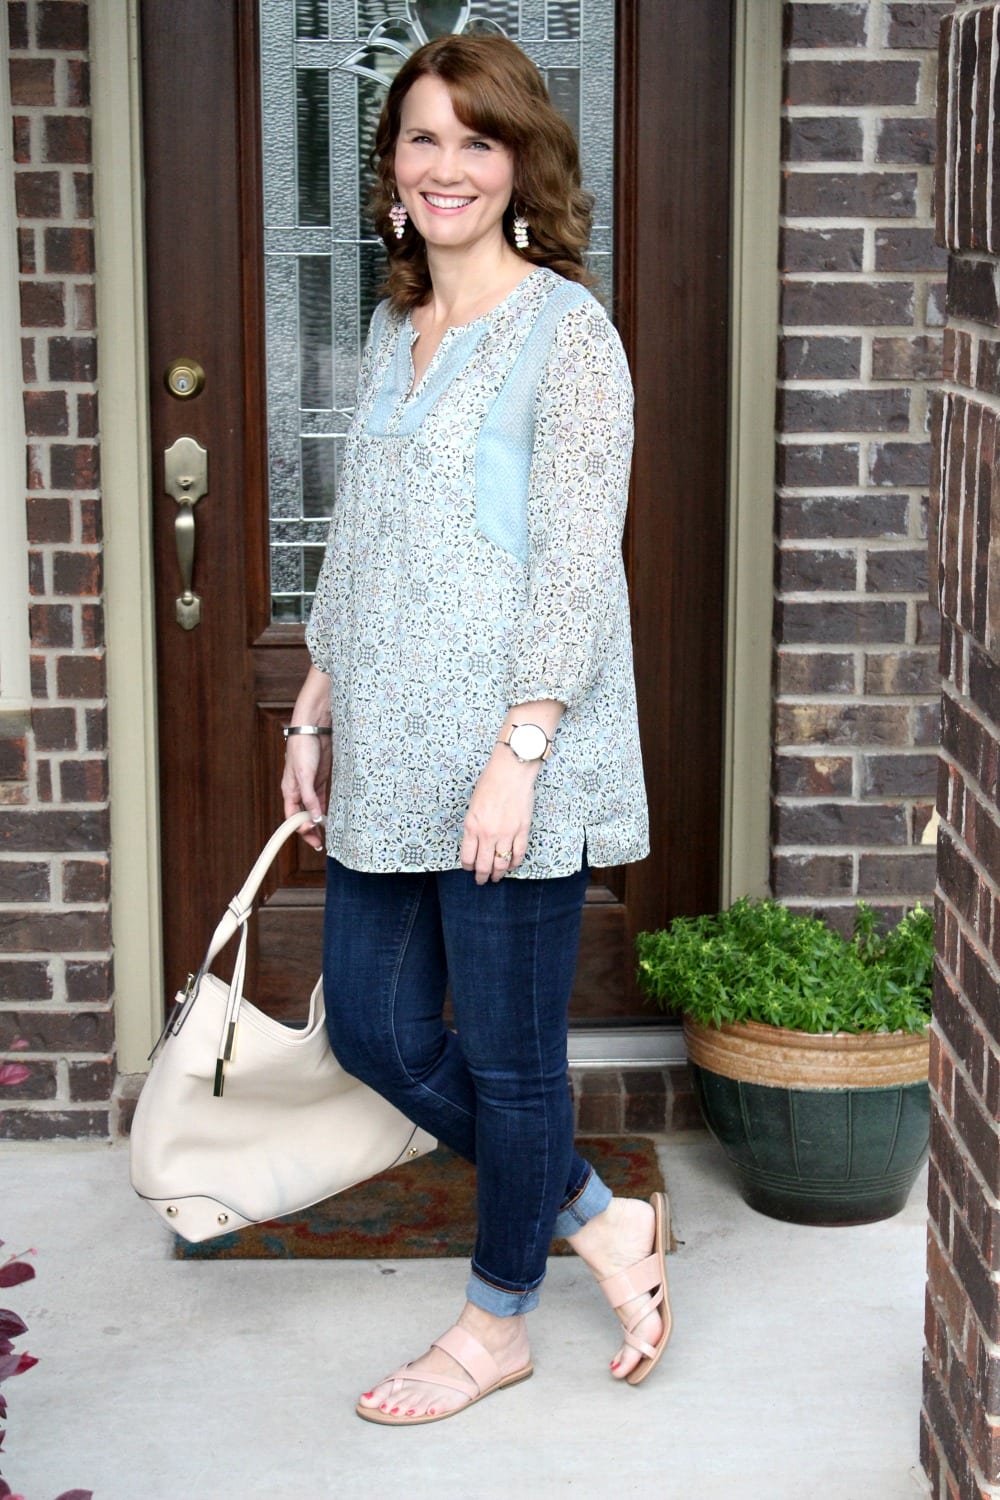 Spring outfit idea: Rolled denim, pastel tunic and patent sandals in blush.